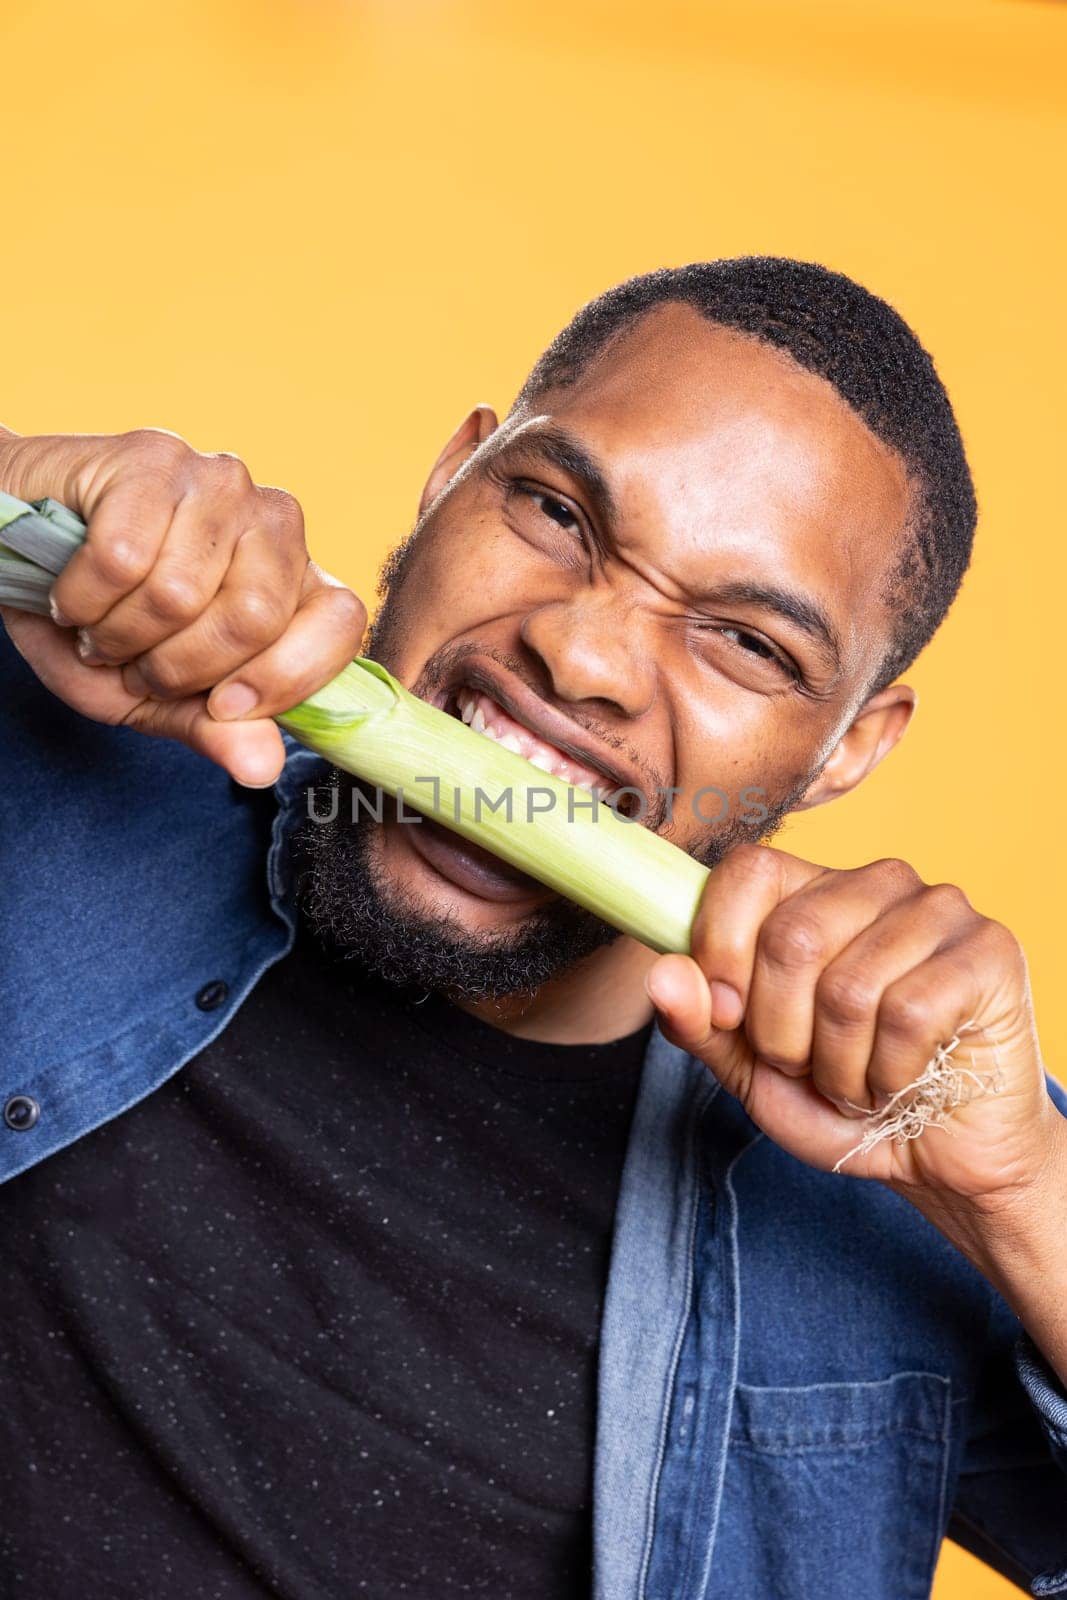 African american joyful man pretending to bite on a leek in studio, fooling around against yellow background with a locally grown green onion. Carefree relaxed person promotes zero waste.